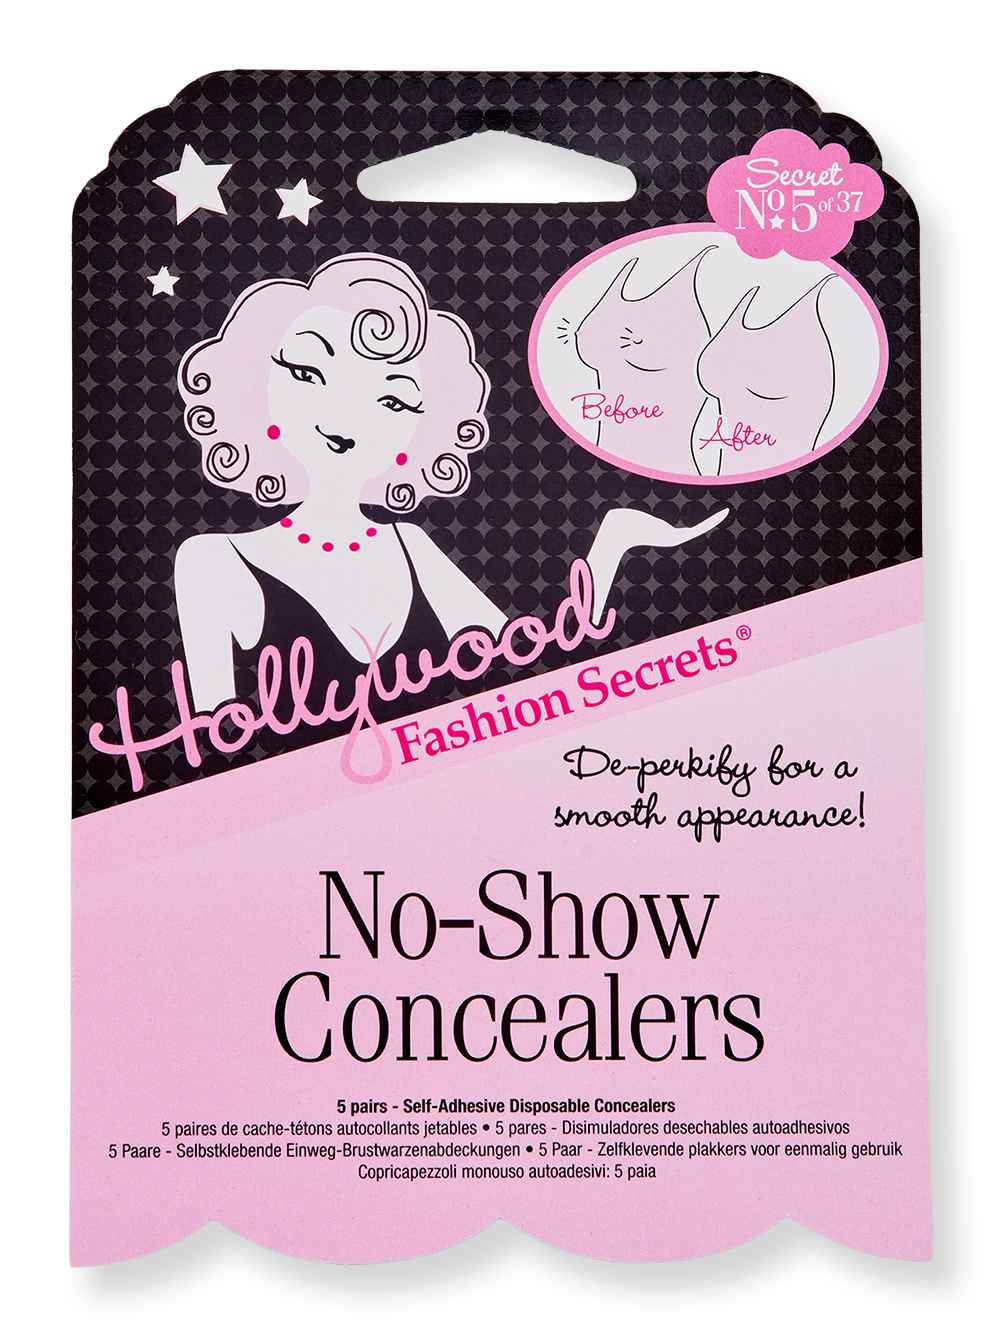 Hollywood Fashion Secrets Hollywood Fashion Secrets No-Show Concealers 5 Pairs Apparel Accessories 